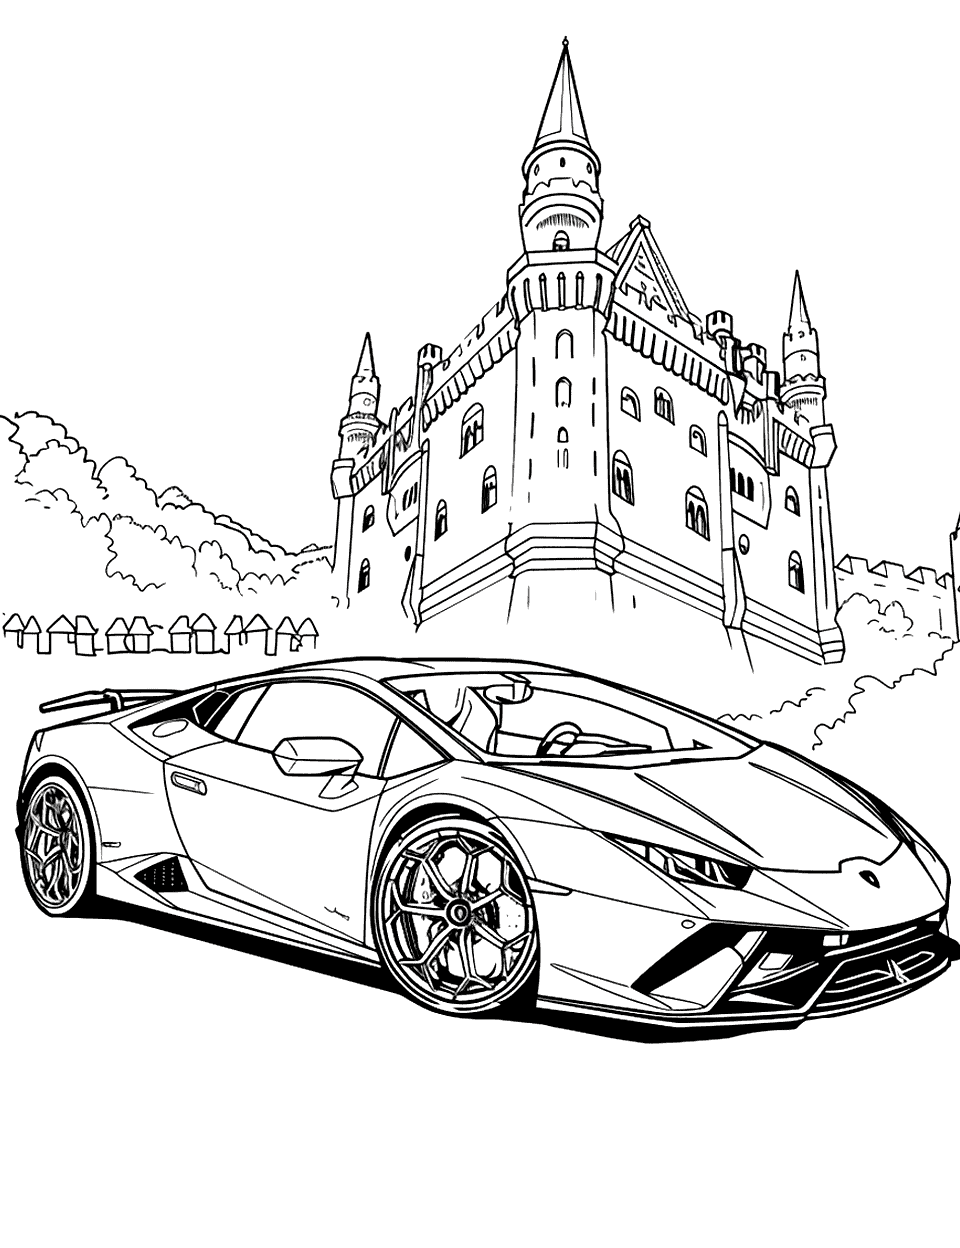 Lamborghini and the Castle Coloring Page - A Lamborghini parked in front of an old castle, blending modern with ancient.